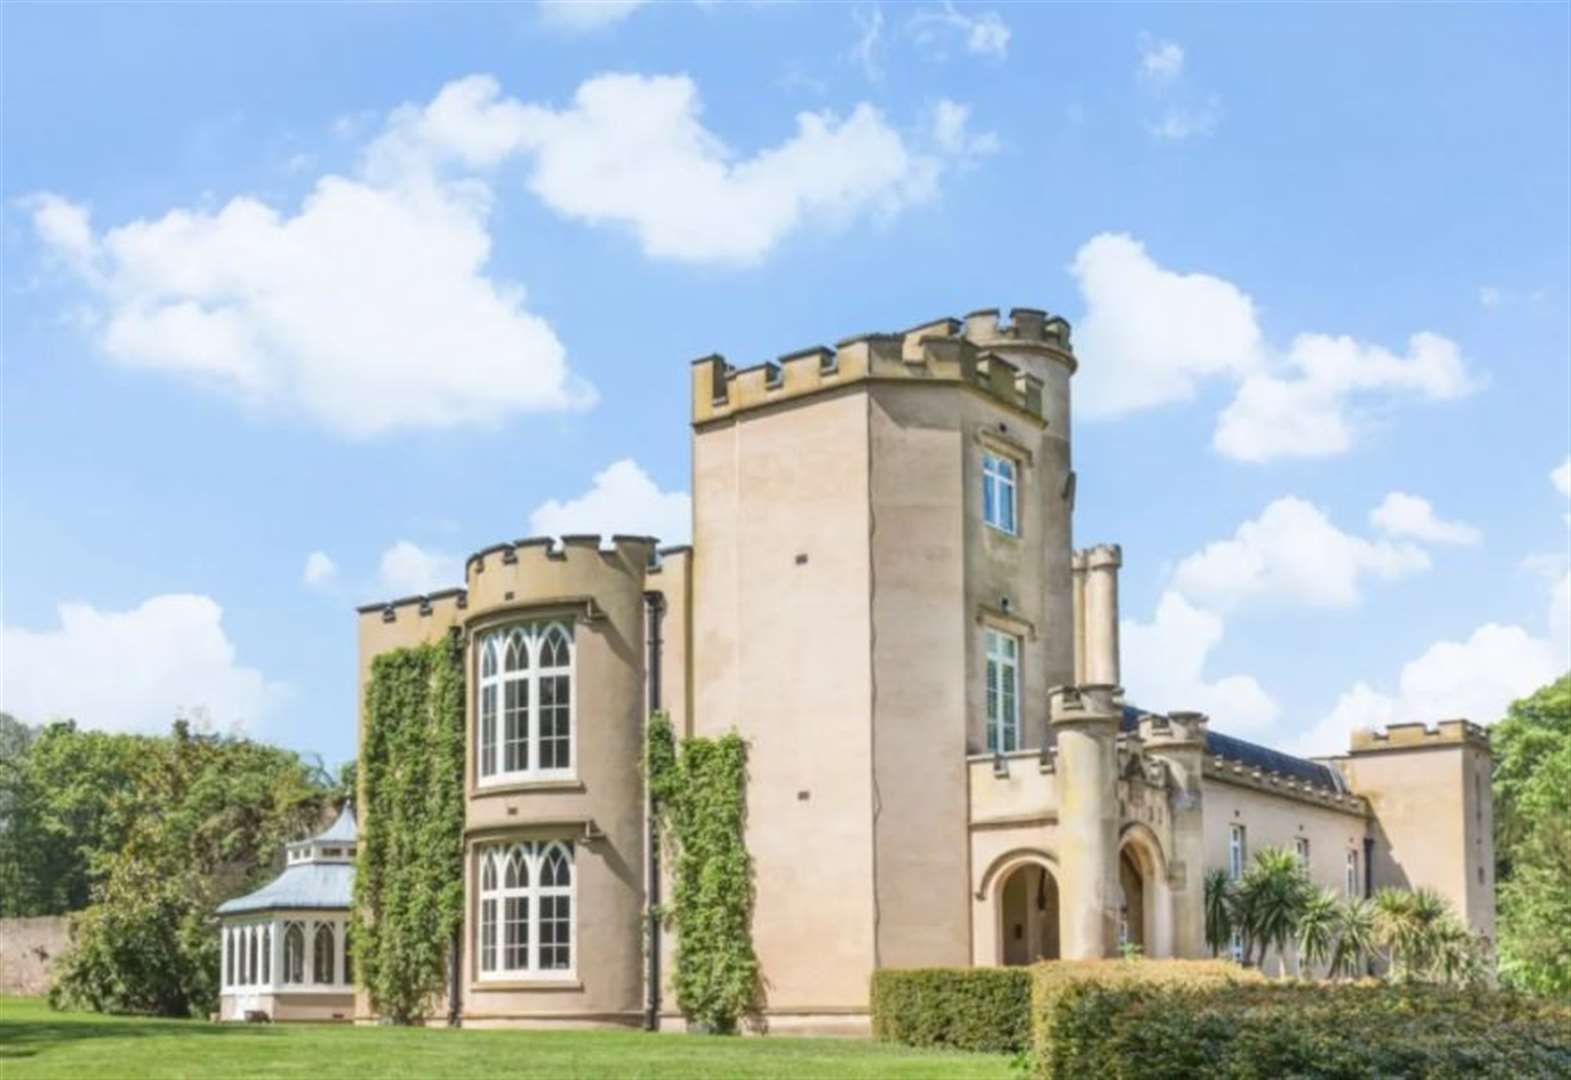 Gothic manor up for sale for £6.5m in abandoned village